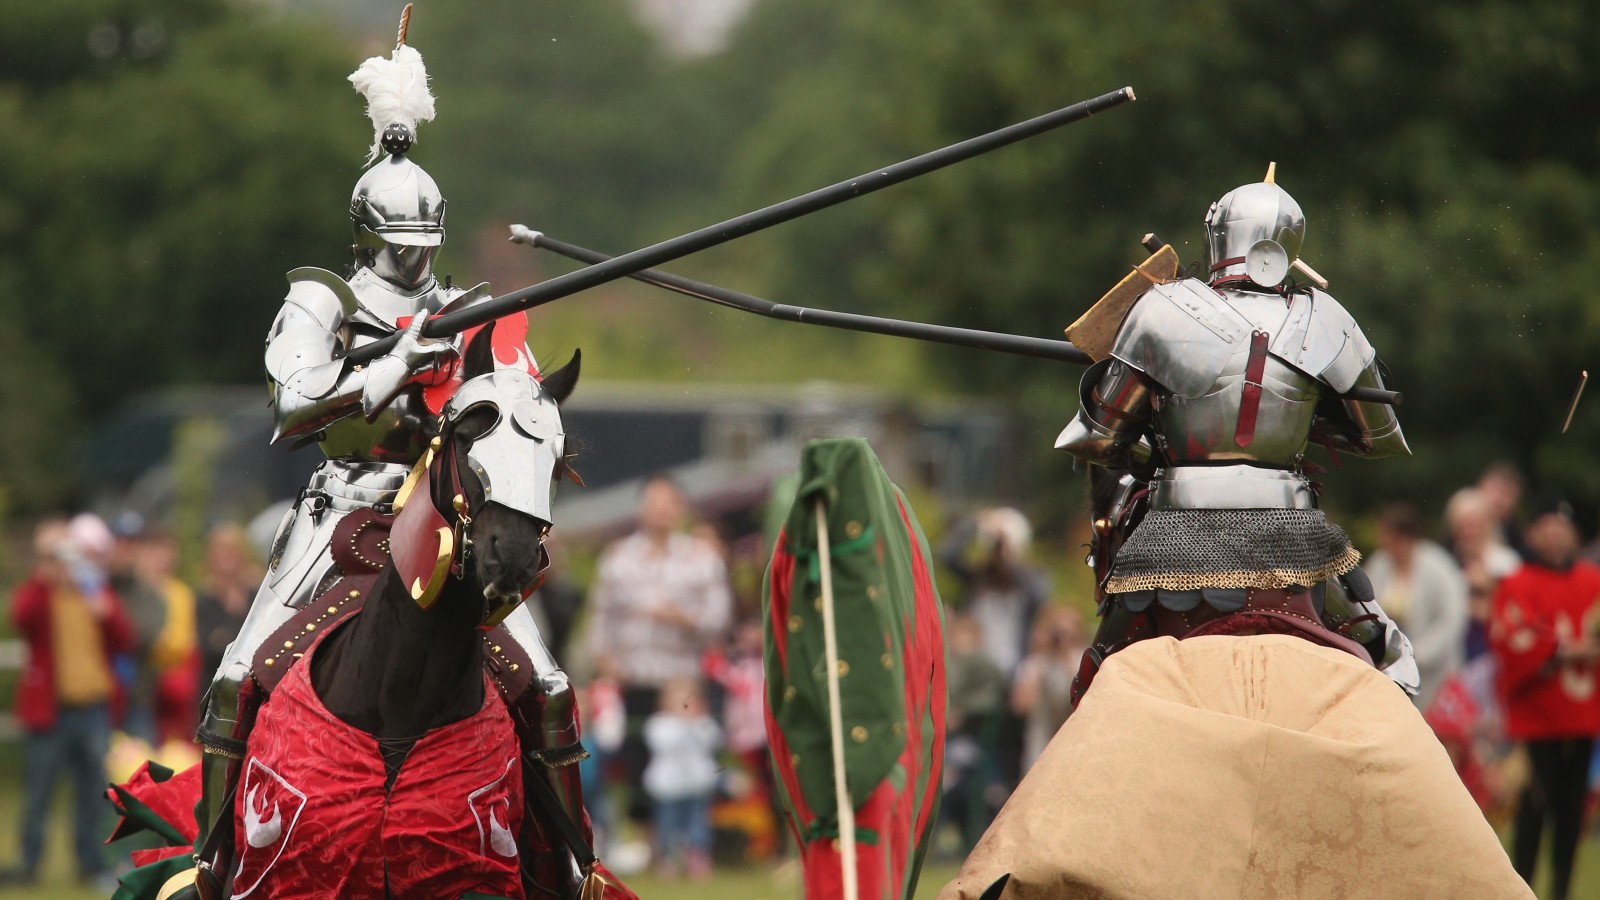 Jousting: Origins and history of the medieval sport | Live Science